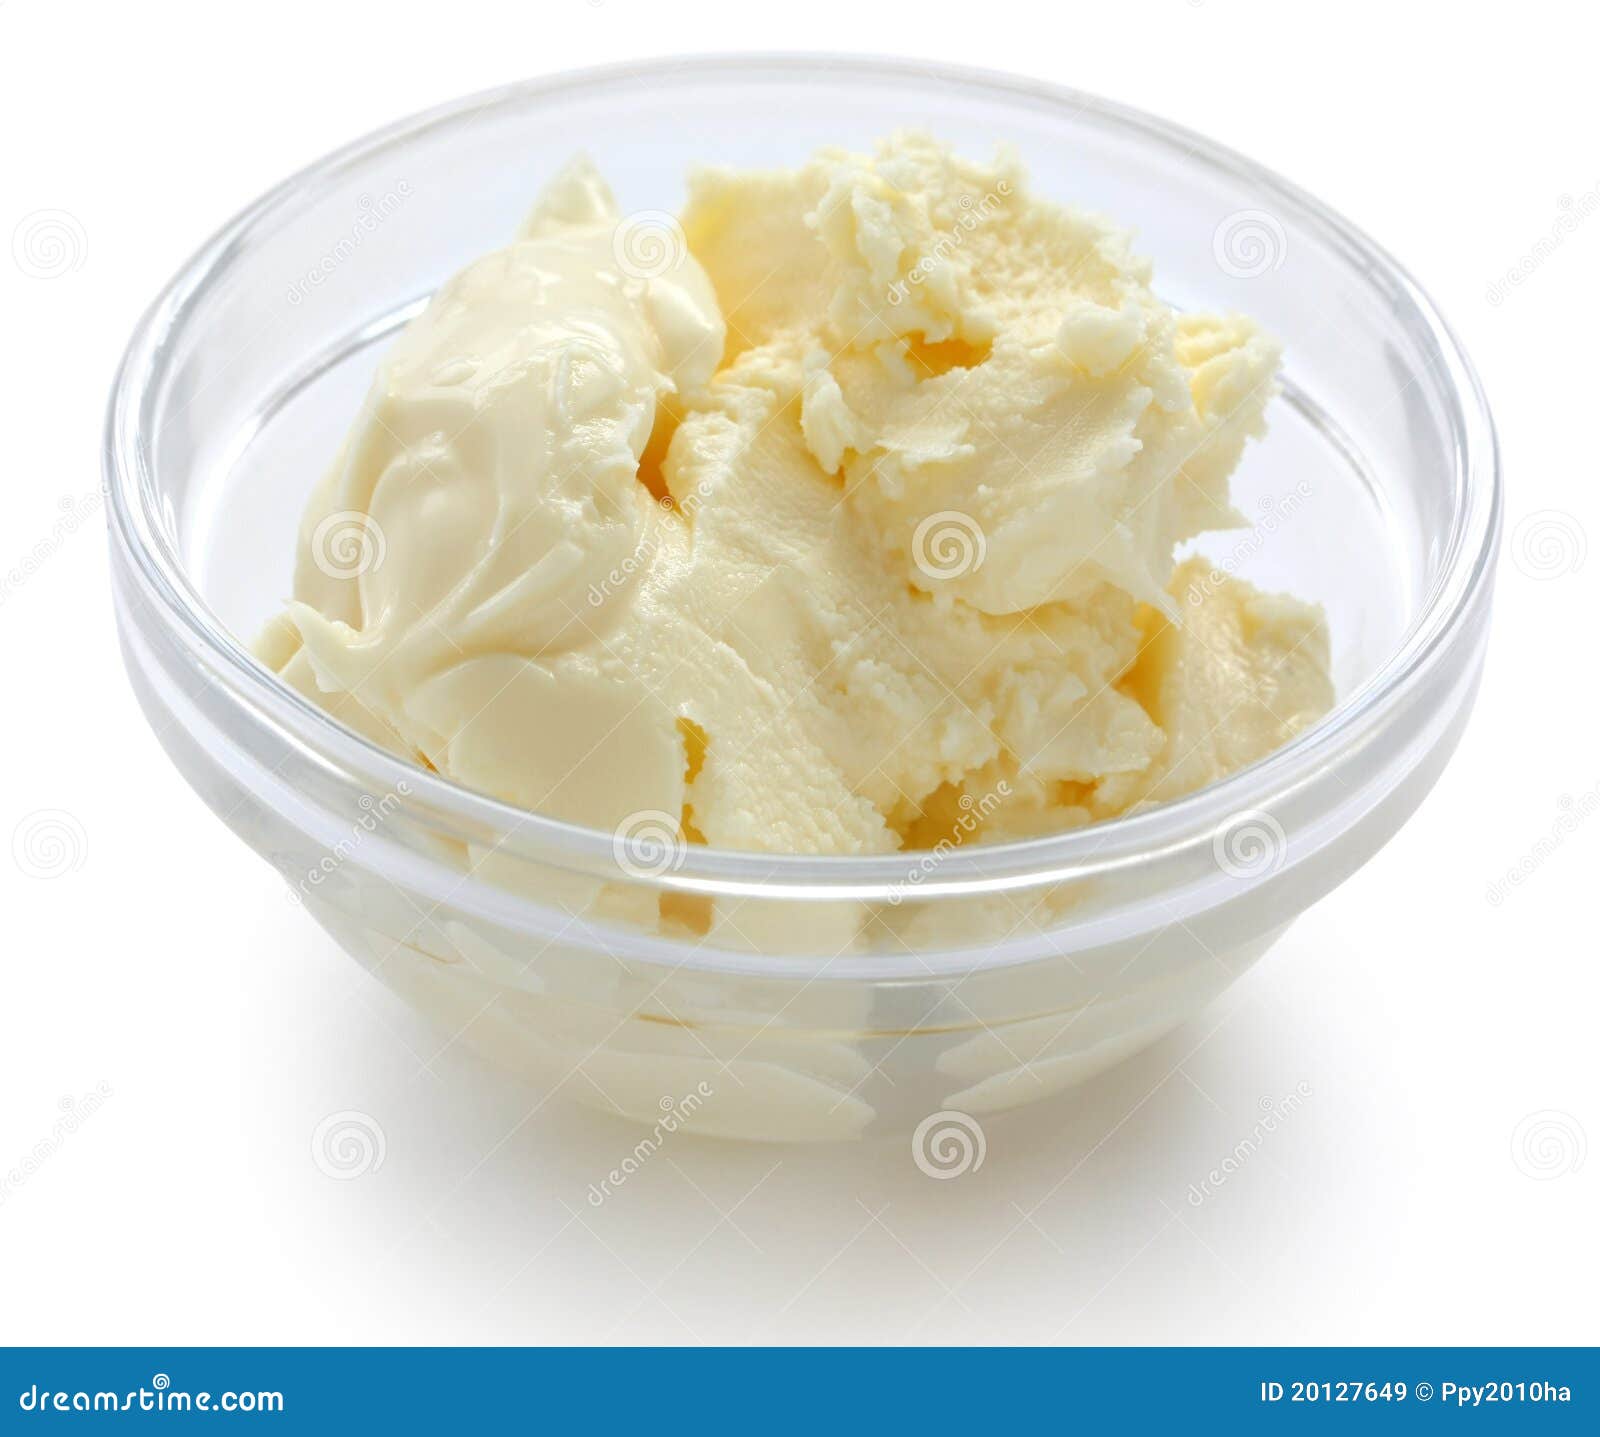 clotted cream in a glass bowl